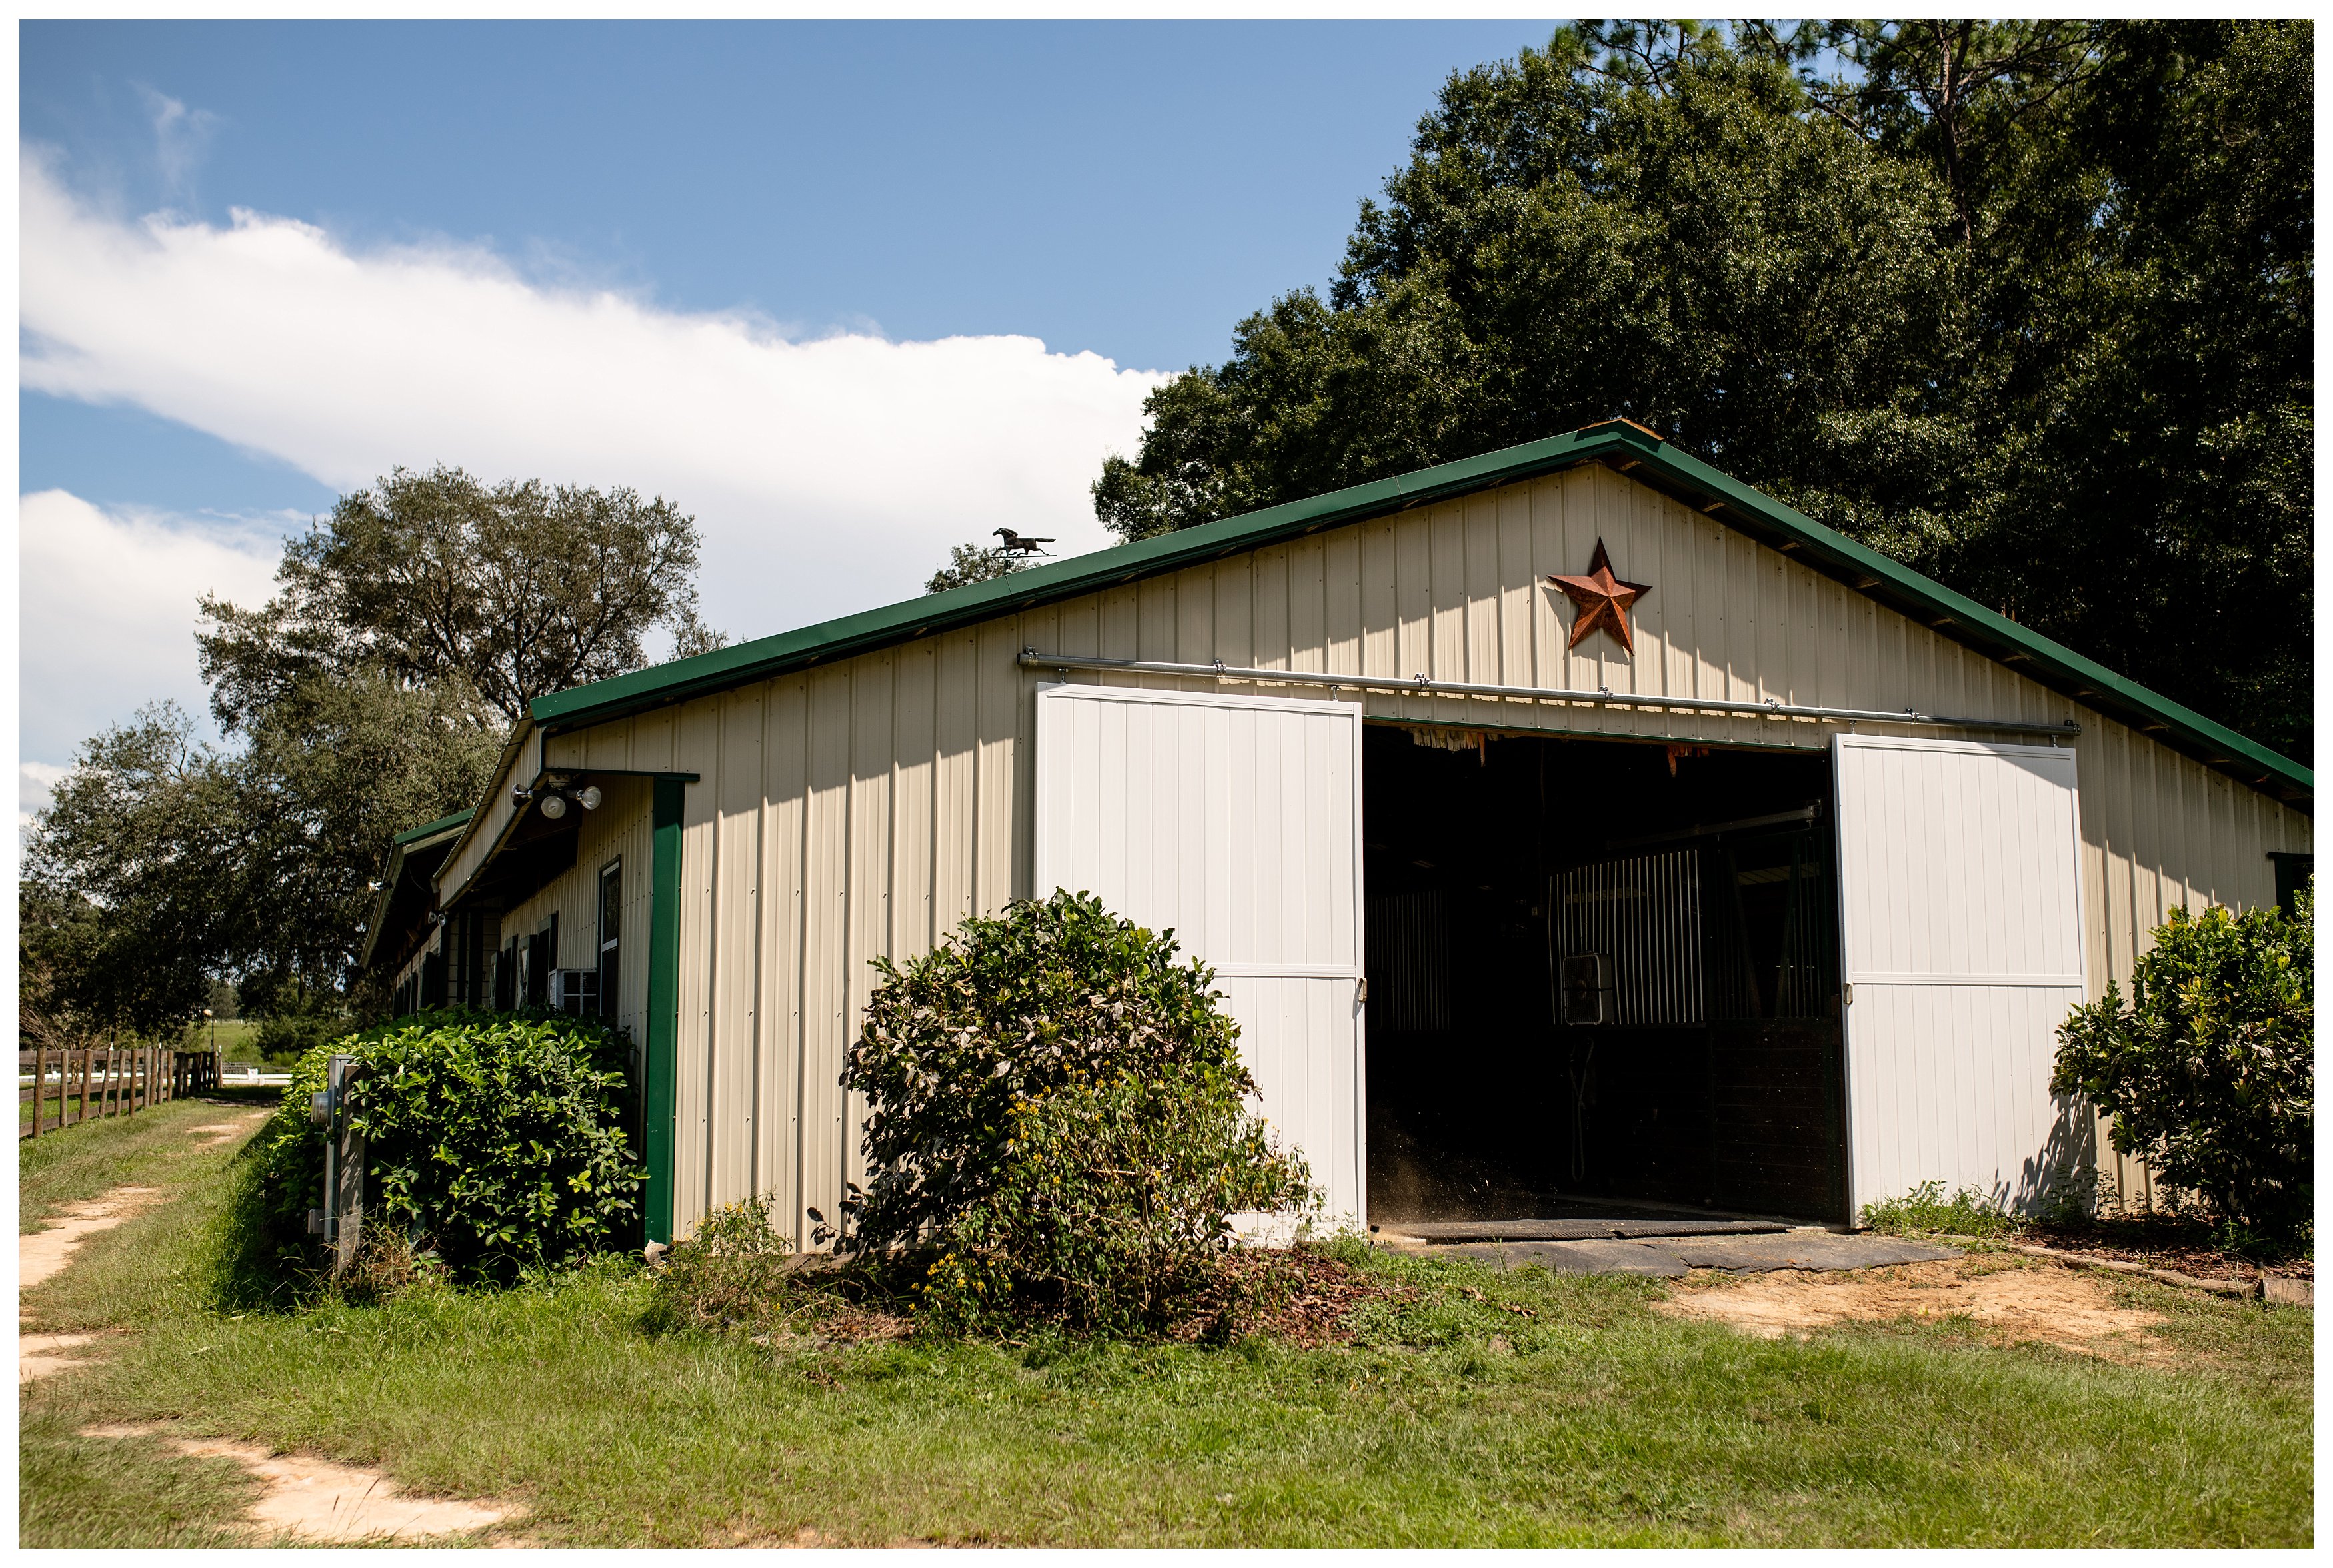 Training and lesson barn just south of Ocala, Fl.